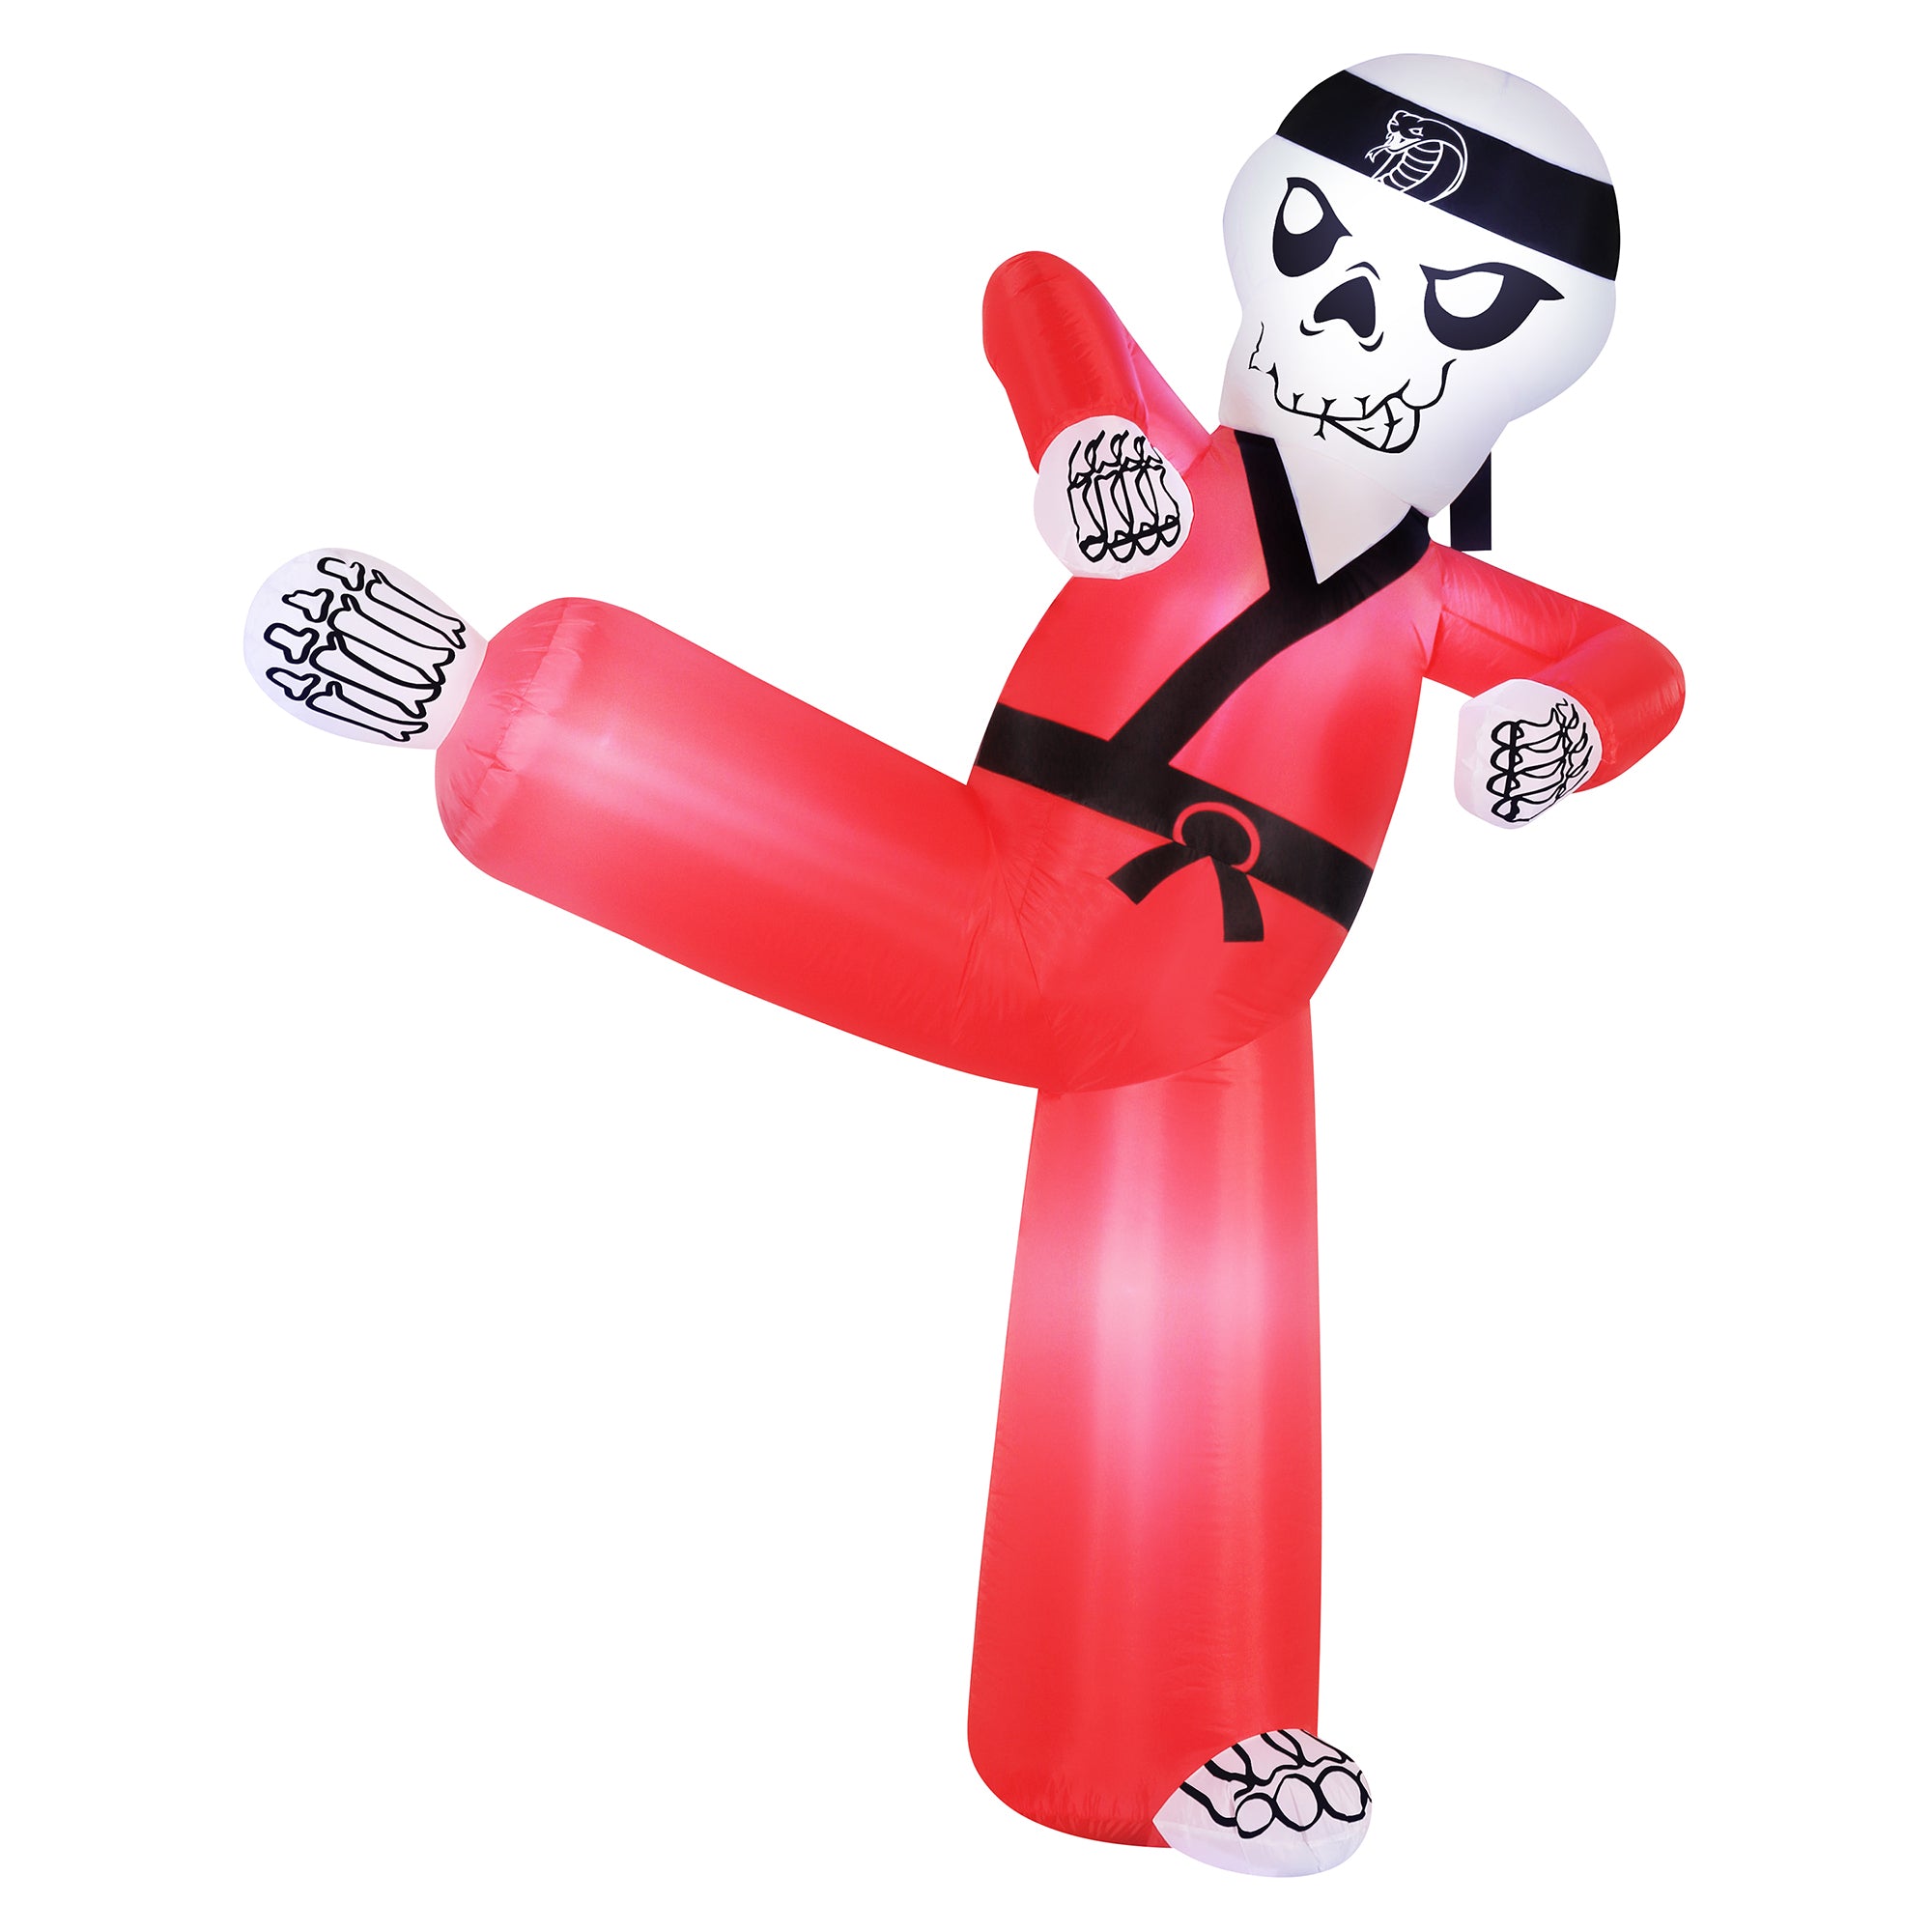 Occasions 6.5' INFLATABLE KARATE SKELETON, 6.5 ft Tall, Multicolored